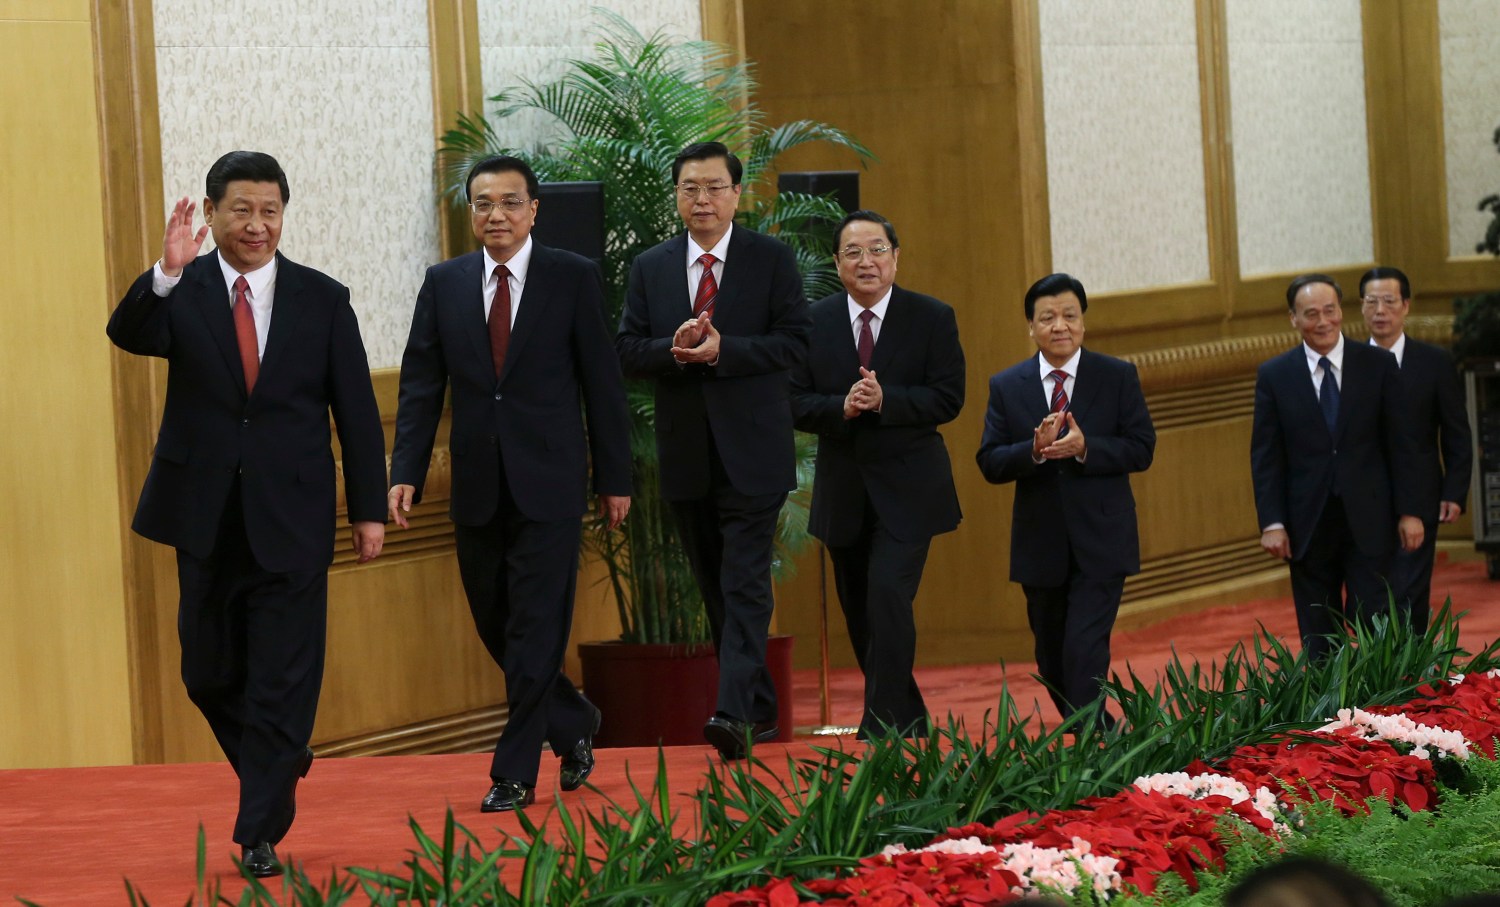 China's new Politburo Standing Committee members (from L to R) Xi Jinping, Li Keqiang, Zhang Dejiang, Yu Zhengsheng, Liu Yunshan, Wang Qishan and Zhang Gaoli, arrive to meet with the press at the Great Hall of the People in Beijing, November 15, 2012. China's ruling Communist Party unveiled its new leadership line-up on Thursday to steer the world's second-largest economy for the next five years, with Vice President Xi Jinping taking over from outgoing President Hu Jintao as party chief. REUTERS/China Daily (CHINA - Tags: POLITICS ELECTIONS TPX IMAGES OF THE DAY) CHINA OUT. NO COMMERCIAL OR EDITORIAL SALES IN CHINA - GM1E8BF1AJO01